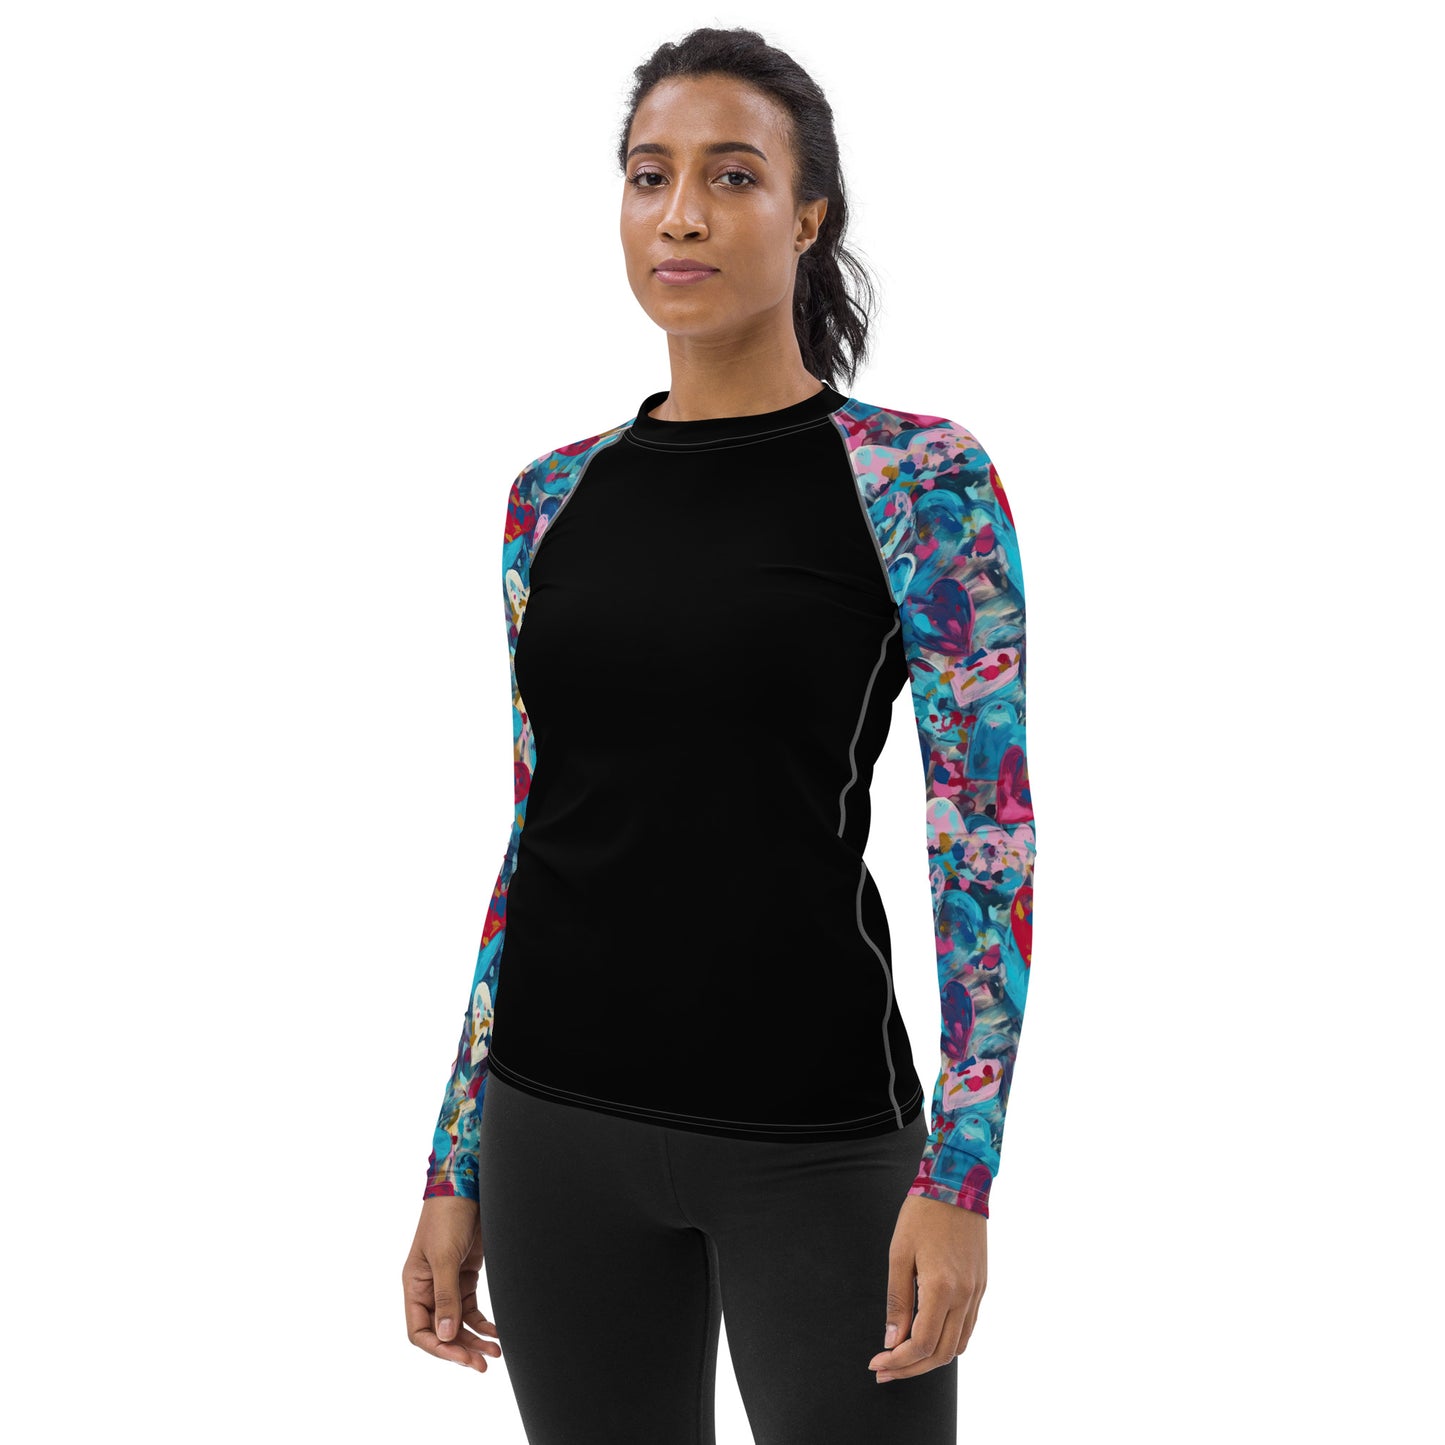 Blue Painted Hearts Sleeves and Black Body - Women's Rash Guard